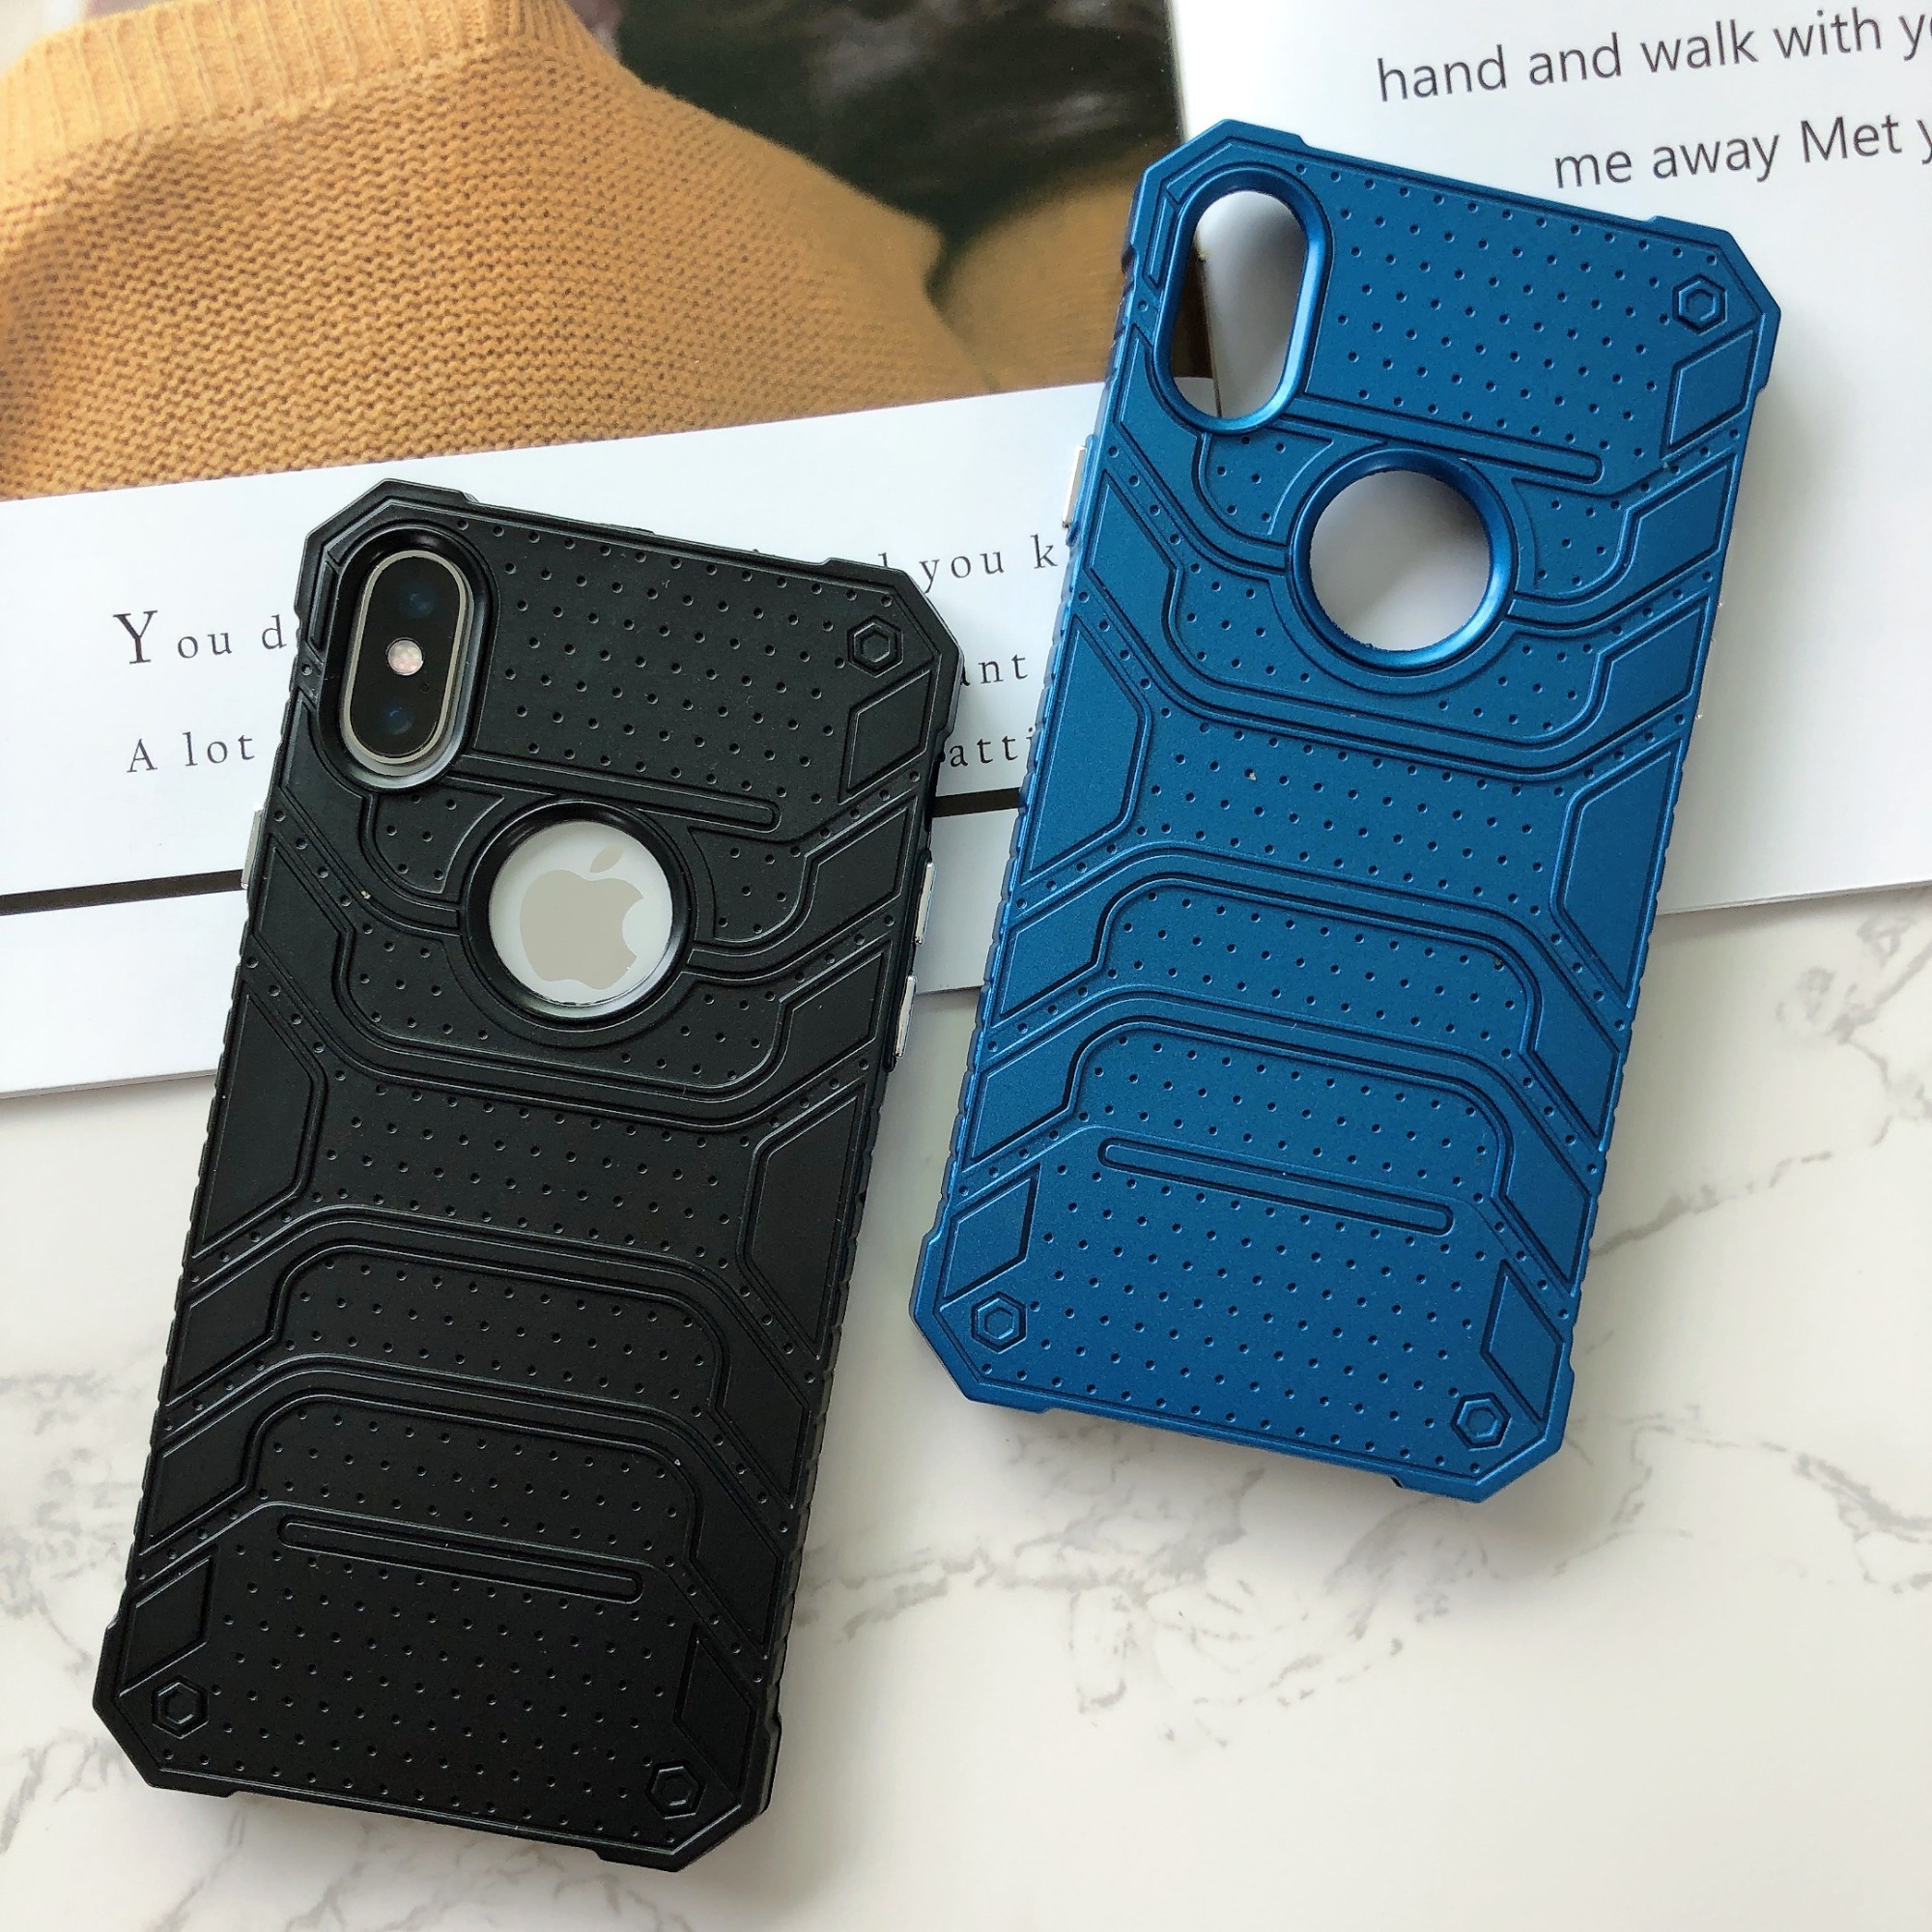 How much do you know about the manufacturing process of silicone mobile phone case?